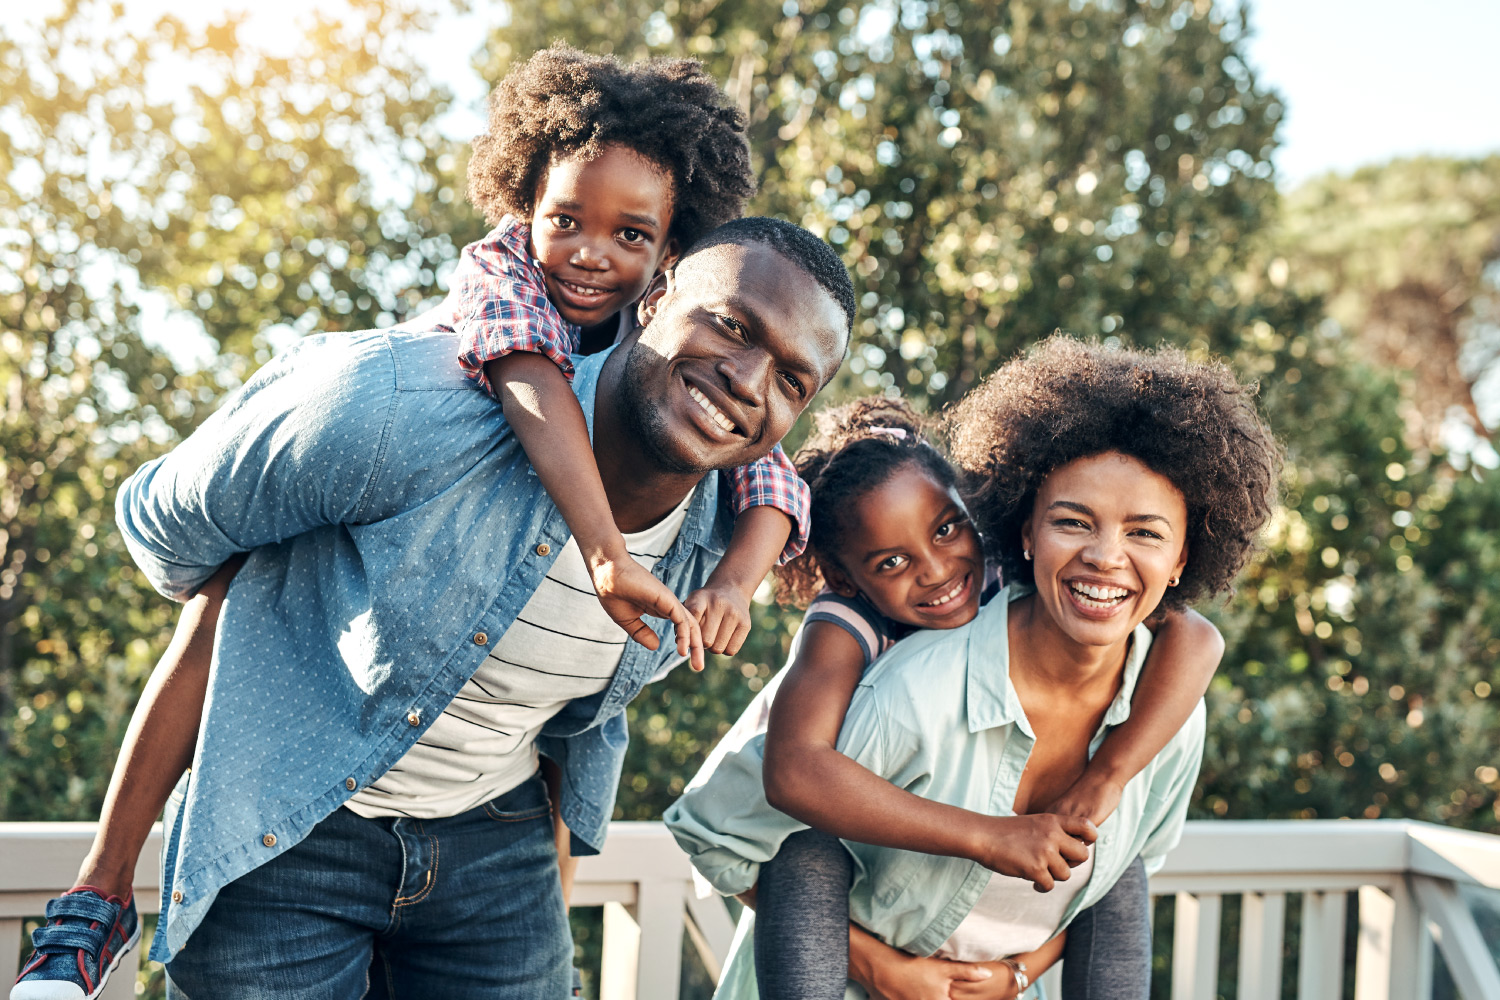 African-American family smiling outside and having fun